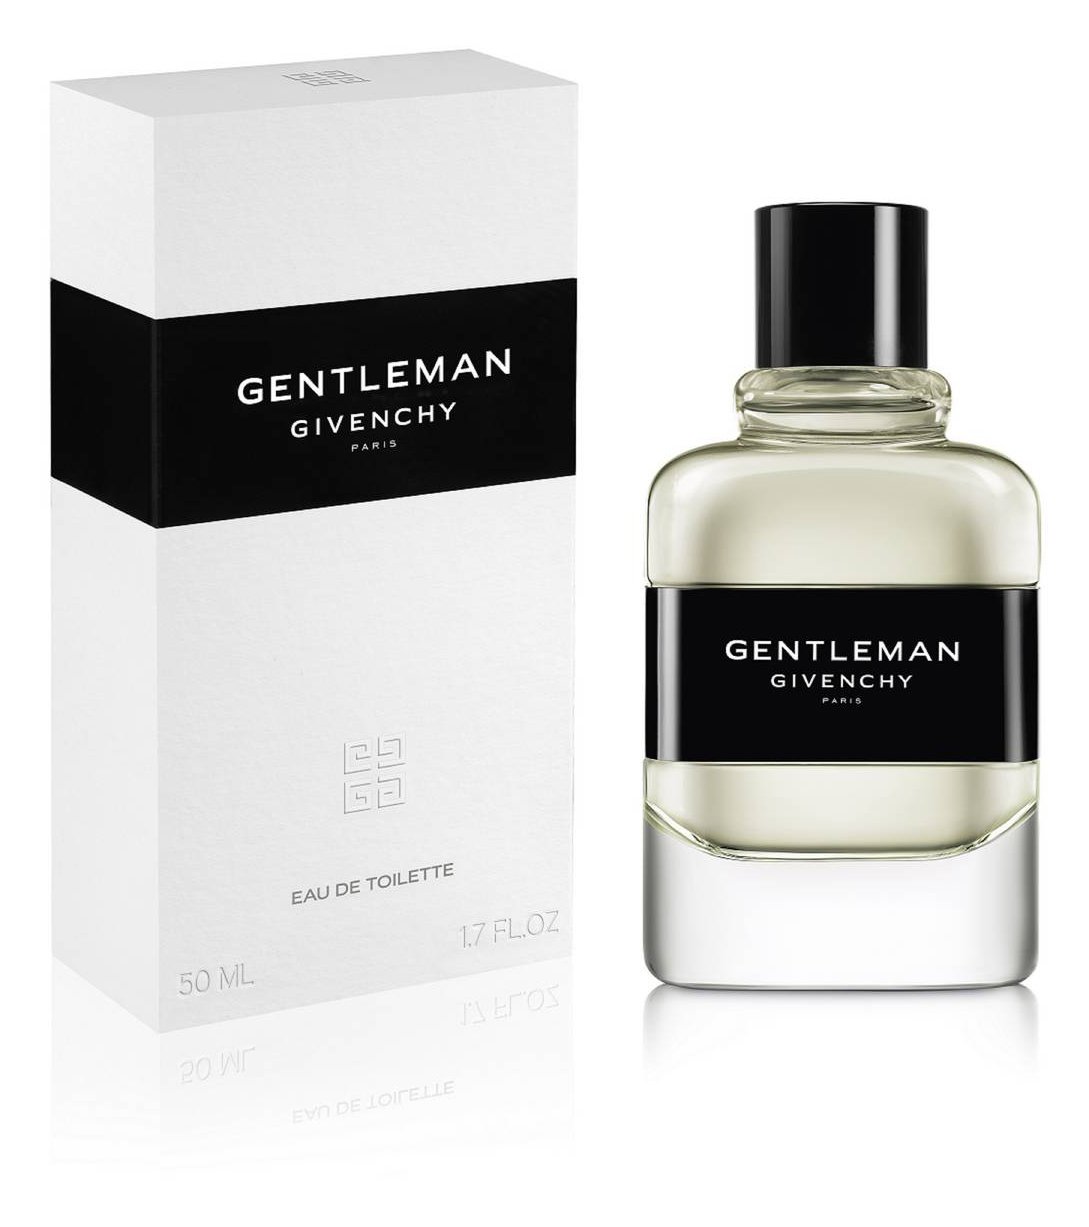 rail Oh Student Gentleman Givenchy by Givenchy (Eau de Toilette) » Reviews & Perfume Facts